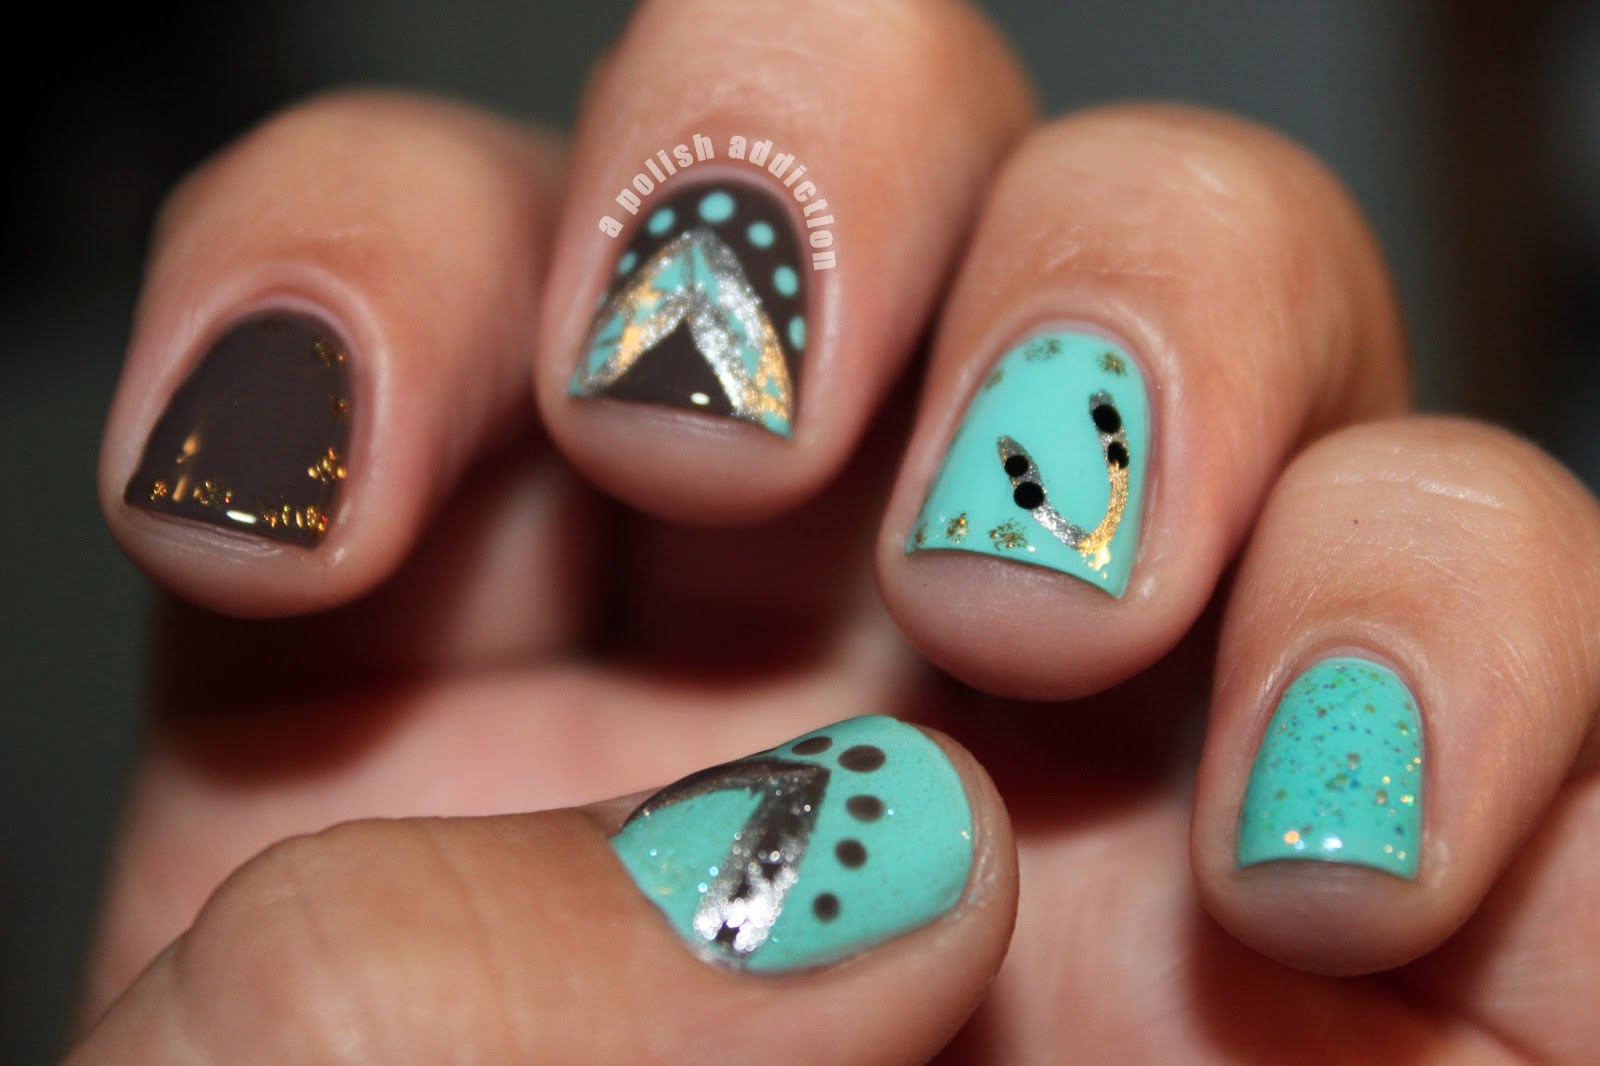 Western Nail Art Designs for Cowboys and Cowgirls - wide 3